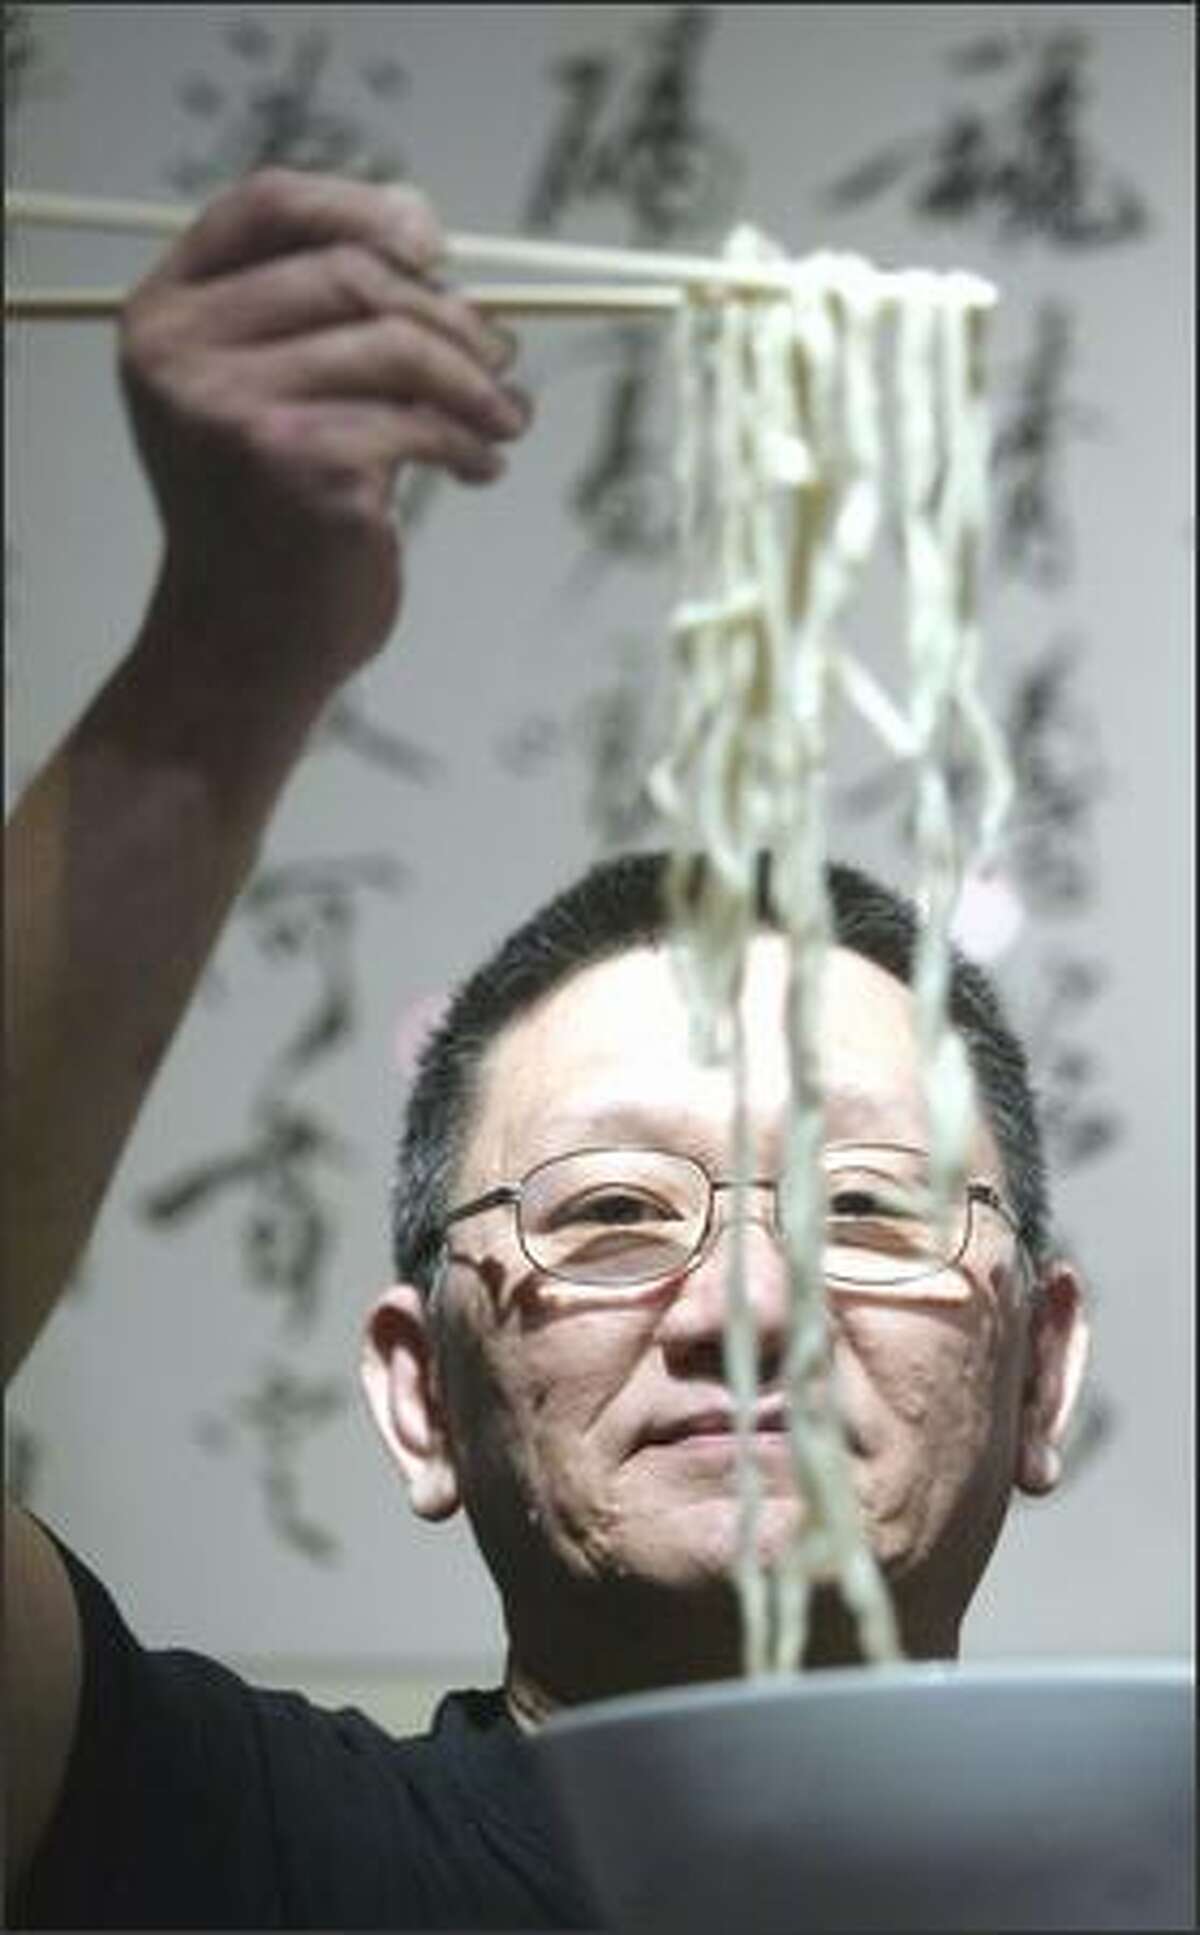 William Chiang, owner of Chiang's Gourmet, shows off his fresh handmade noodles, a Shanghai-style specialty.